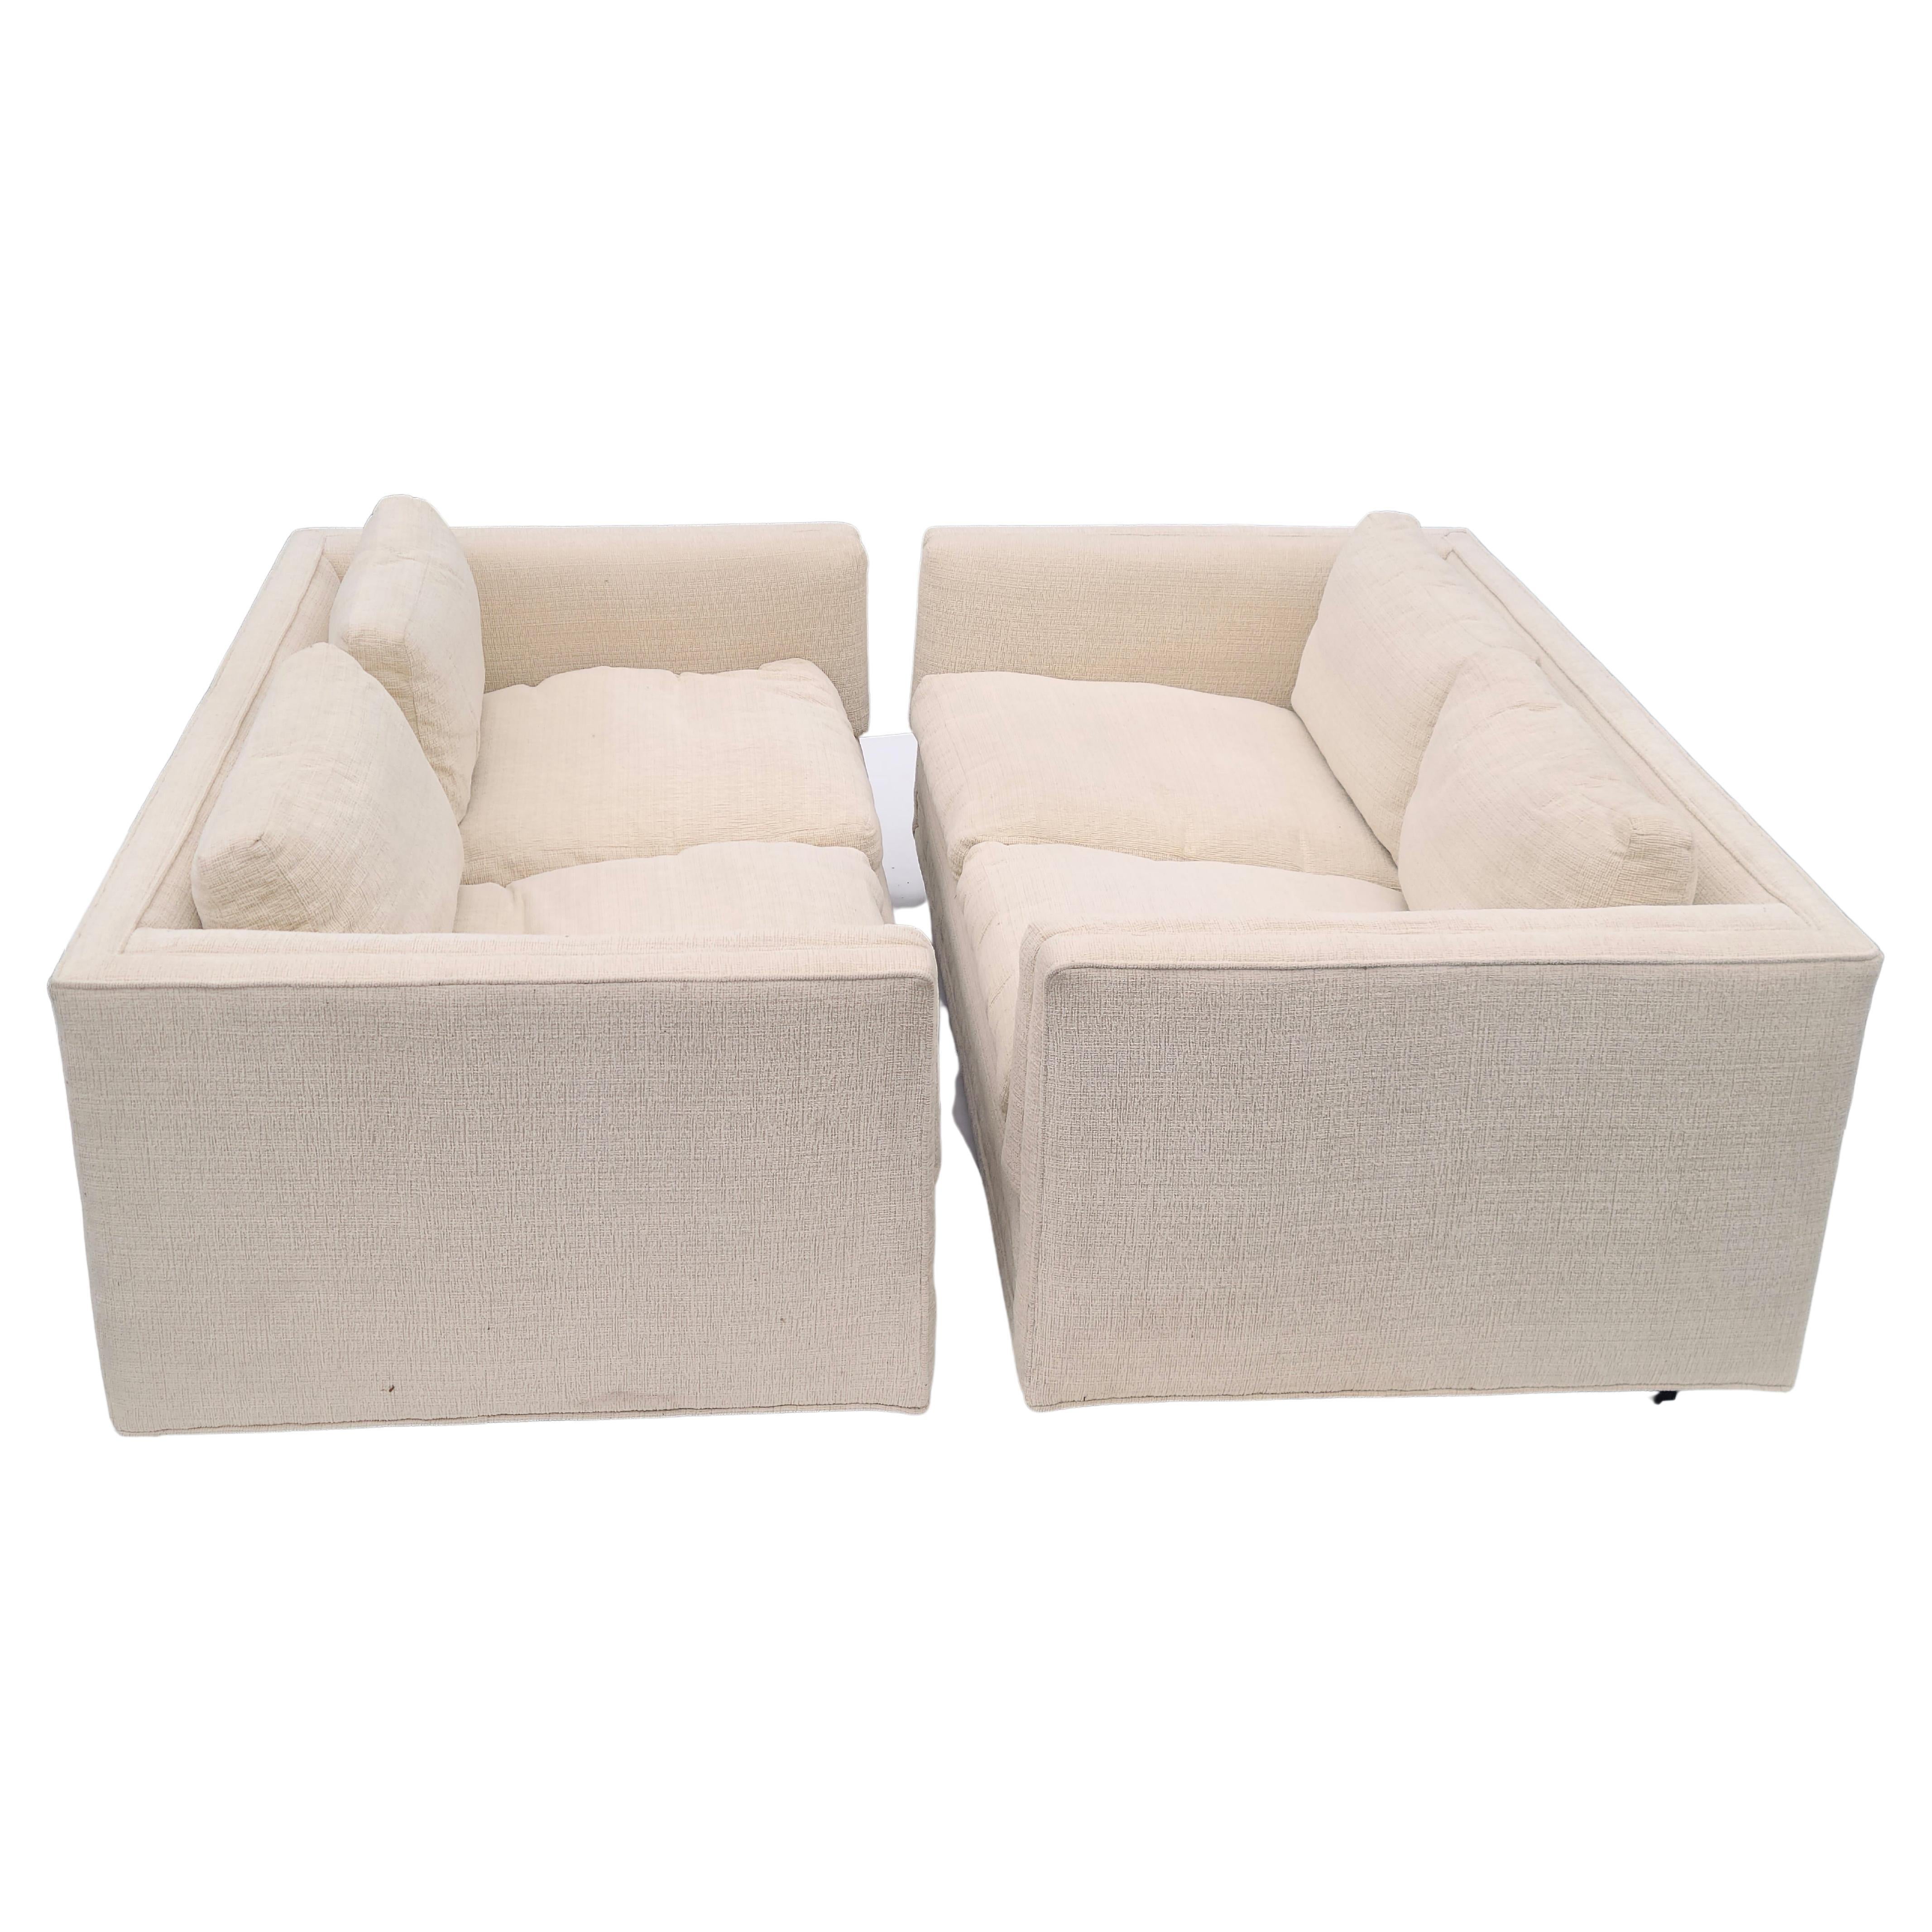 Please feel free to reach out for efficient shipping to your location.

Pair Tuxedo Loveseats.
Recent reupholstery.
Original label missing.
Clean off-white soft textured fabric.
Black lacquer plinth bases.
Matching design by Milo Baughman for Thayer